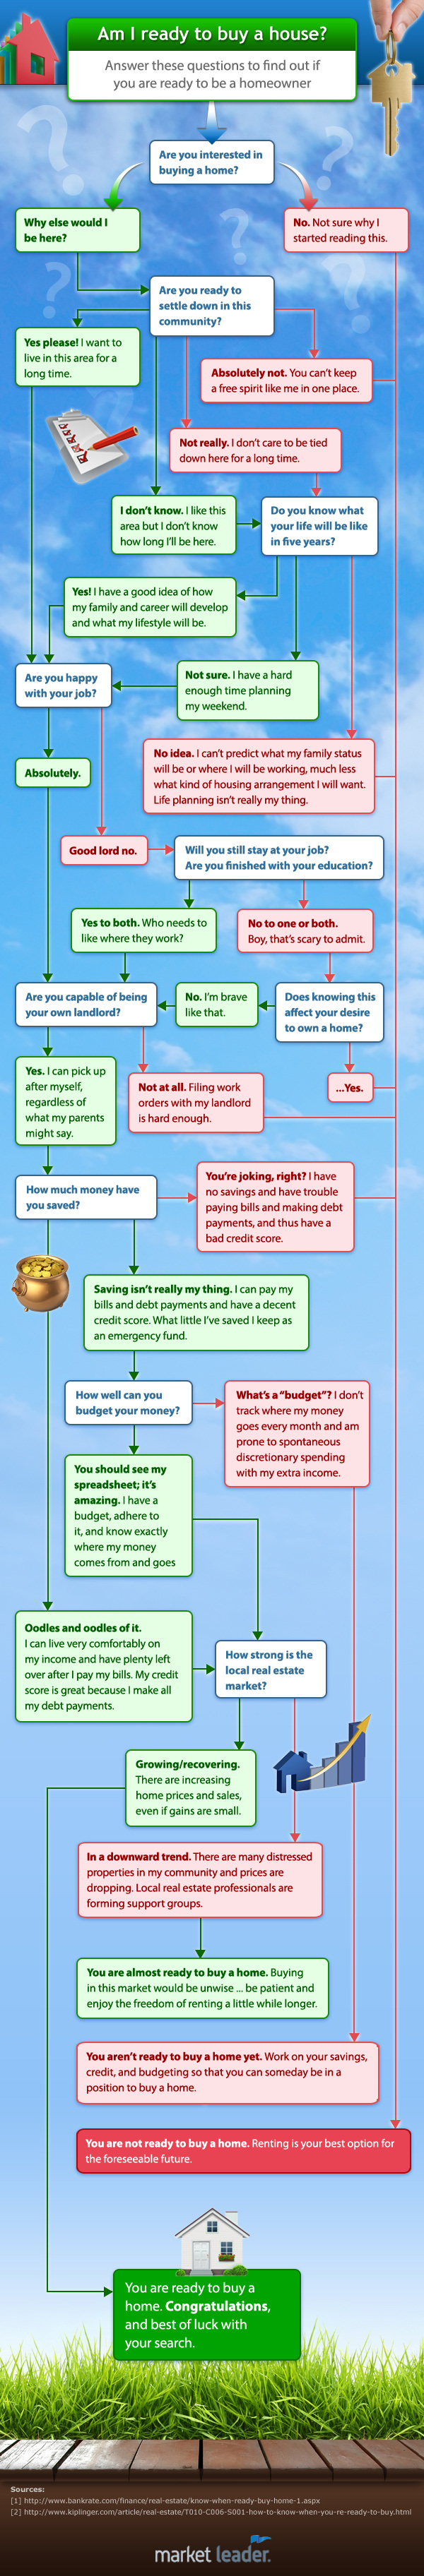 Find out if you are ready to buy a home with this quick and easy flowchart